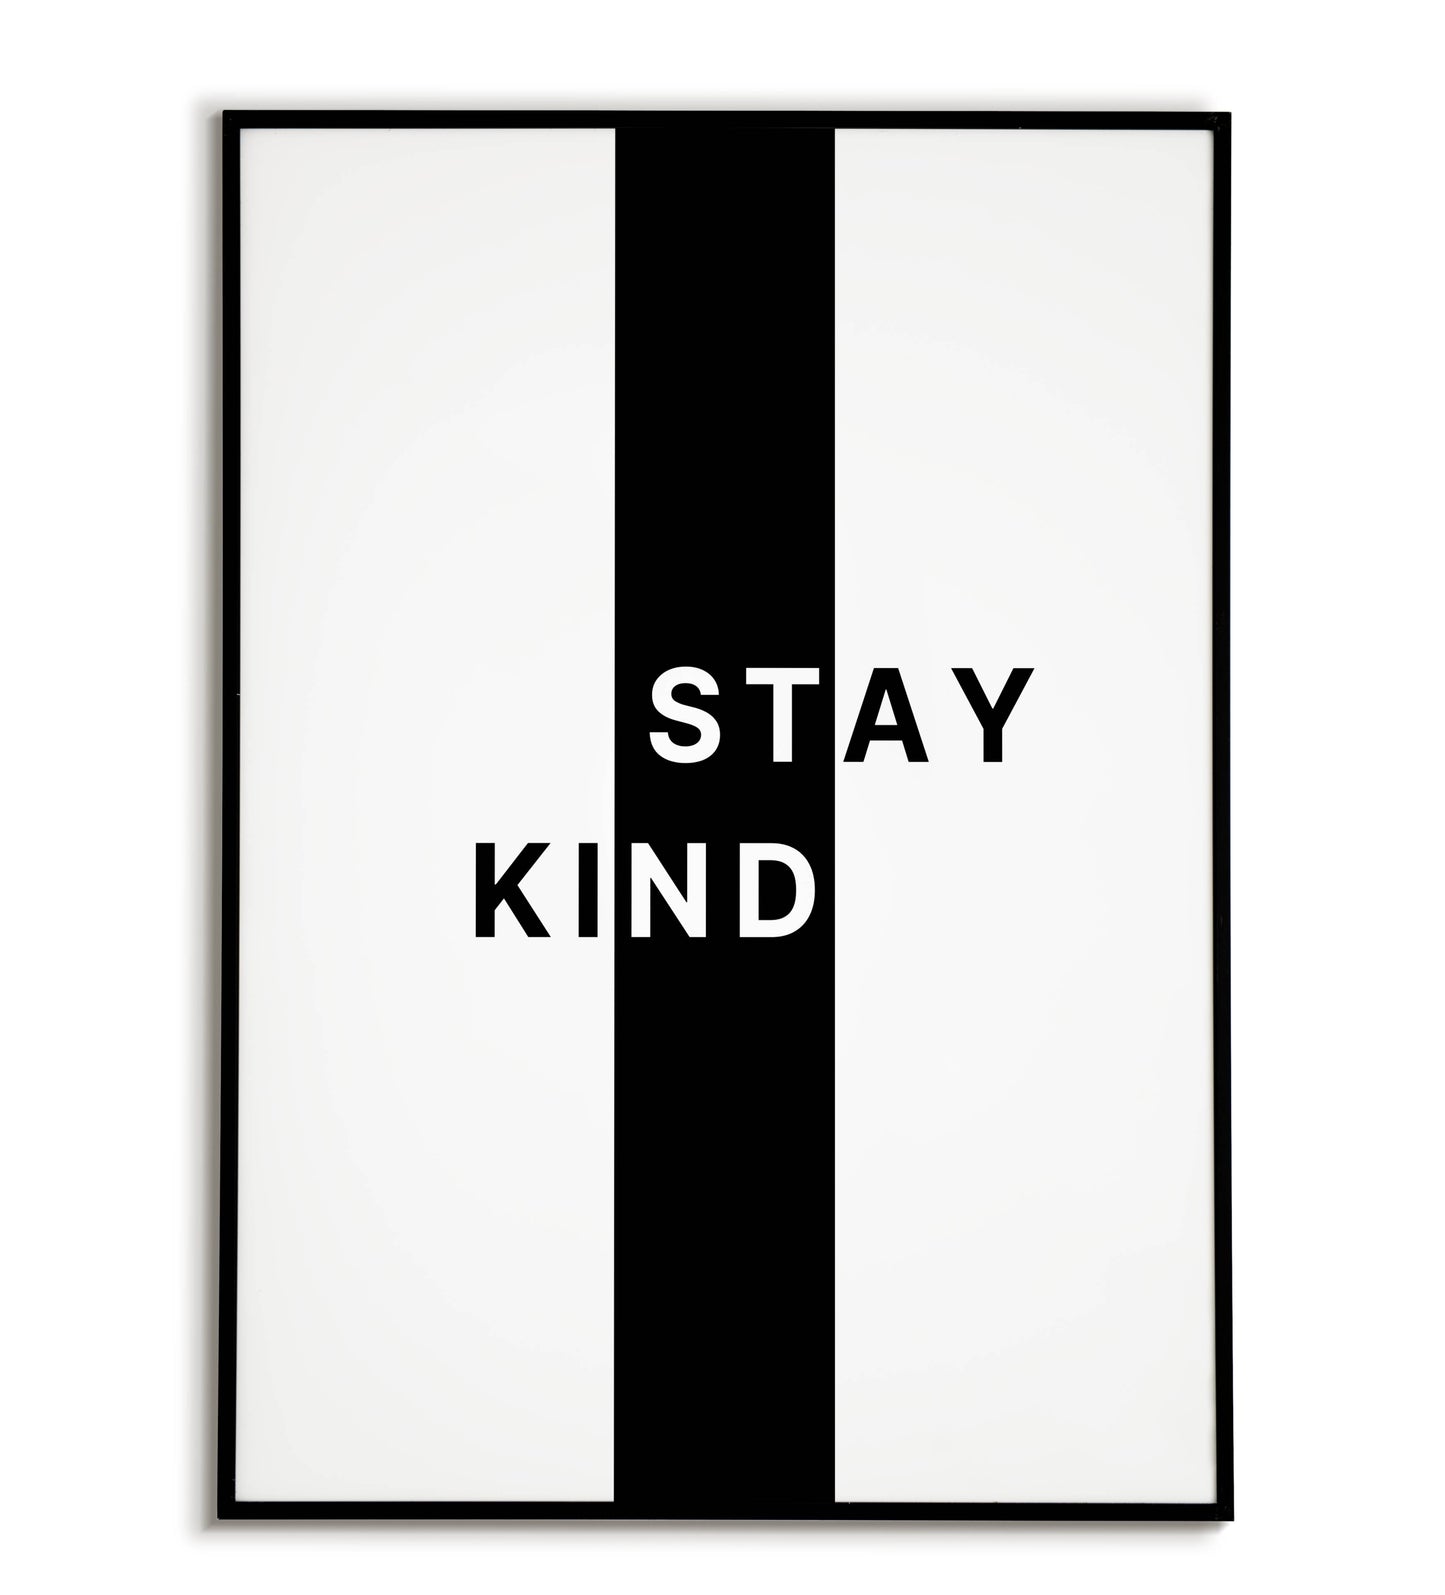 Inspirational "Stay kind" printable poster, promoting kindness and compassion.	